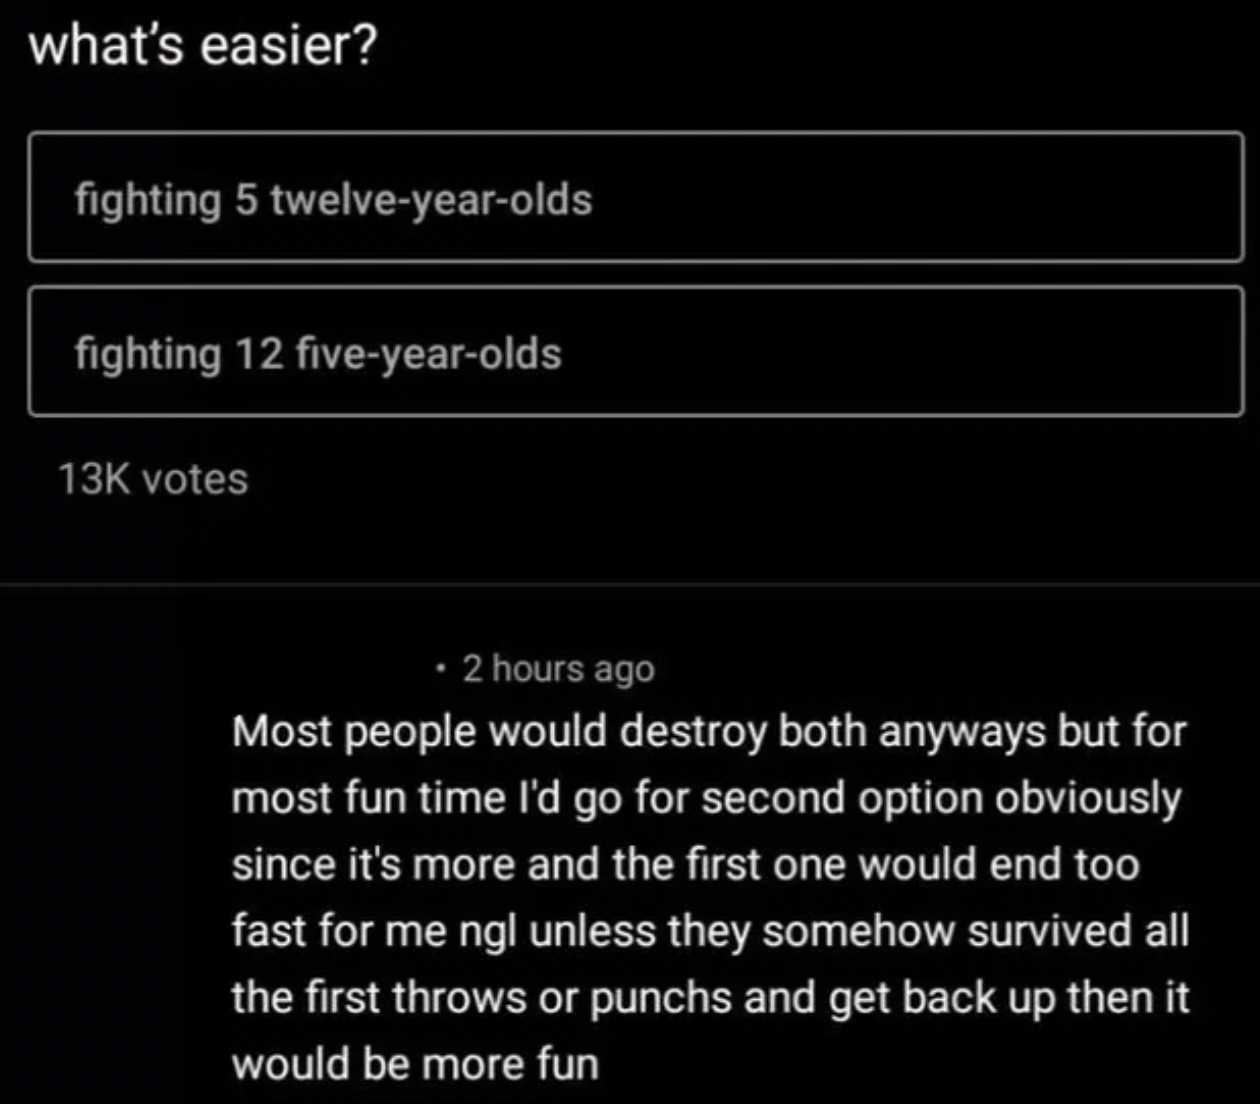 Internet tough guys - light - what's easier? fighting 5 twelveyearolds fighting 12 fiveyearolds 13K votes 2 hours ago Most people would destroy both anyways but for most fun time I'd go for second option obviously since it's more and the first one would e